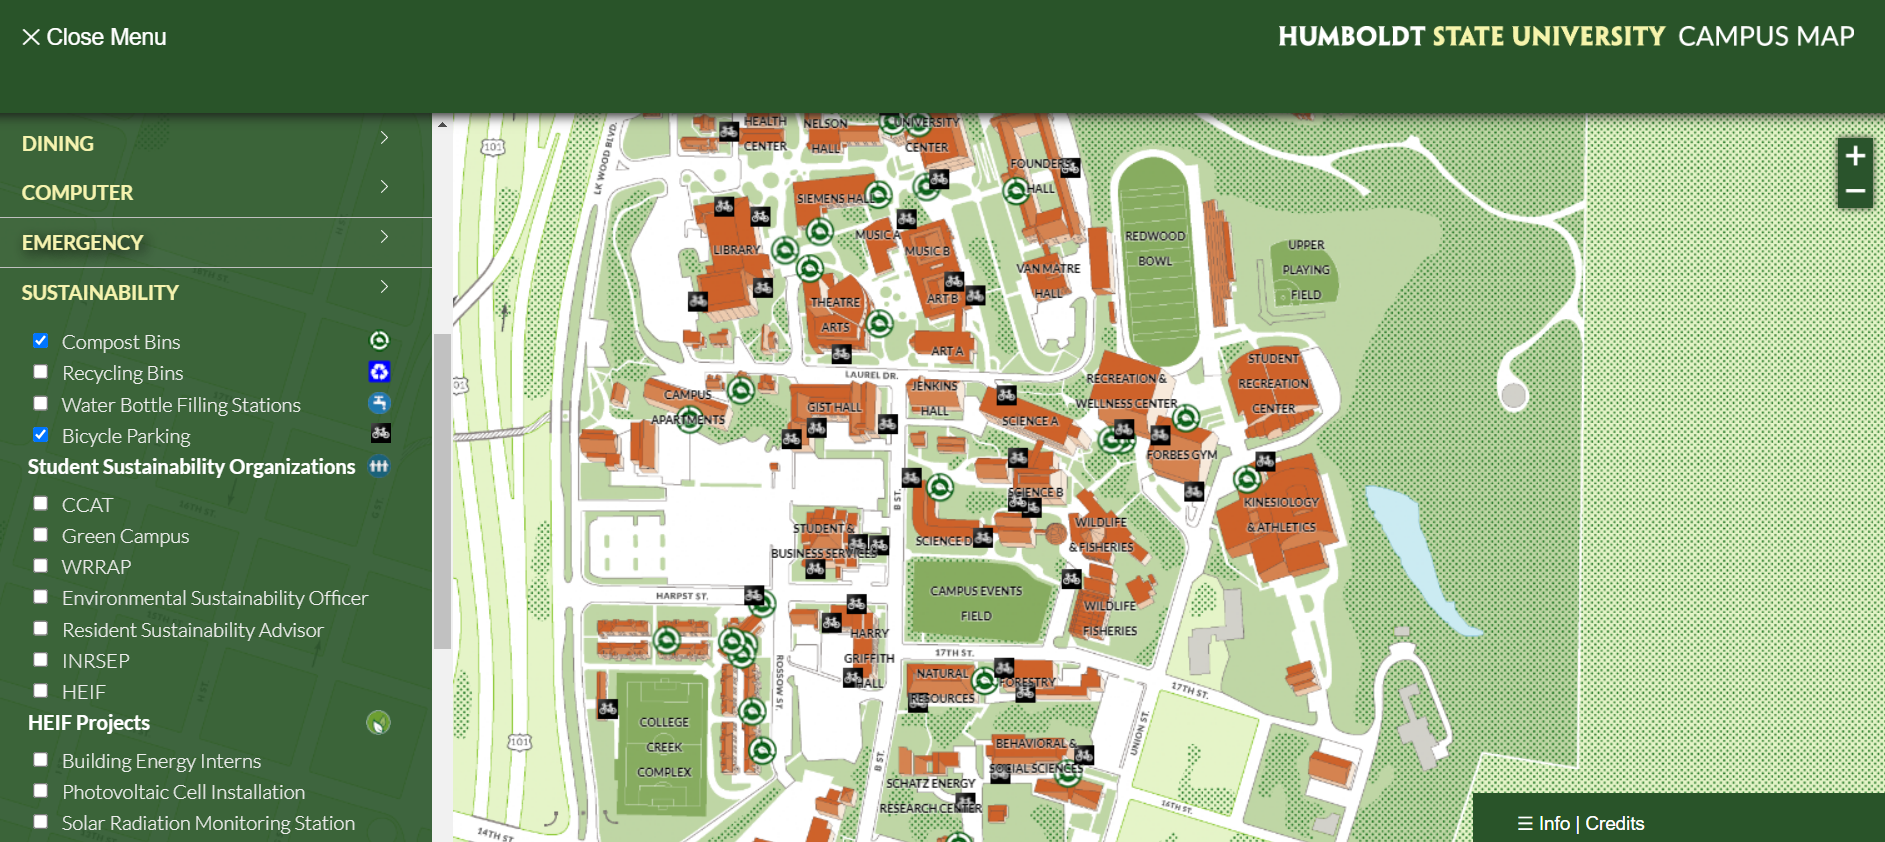 Sustainability layers for compost and bike parking are displayed via small iconography on a campus map. 